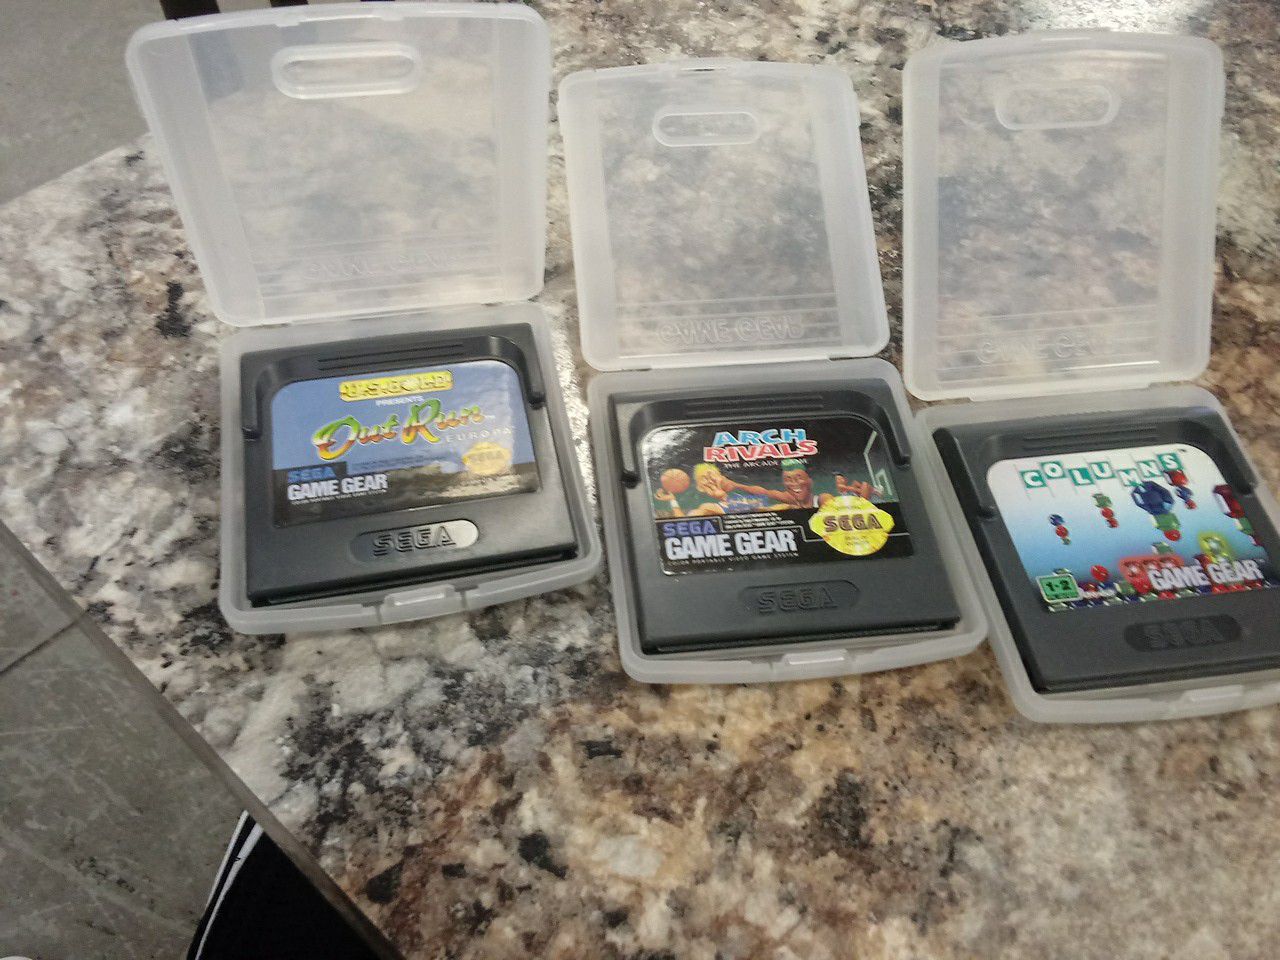 Lot of 3 Sega Game Gear games with carrying cases.